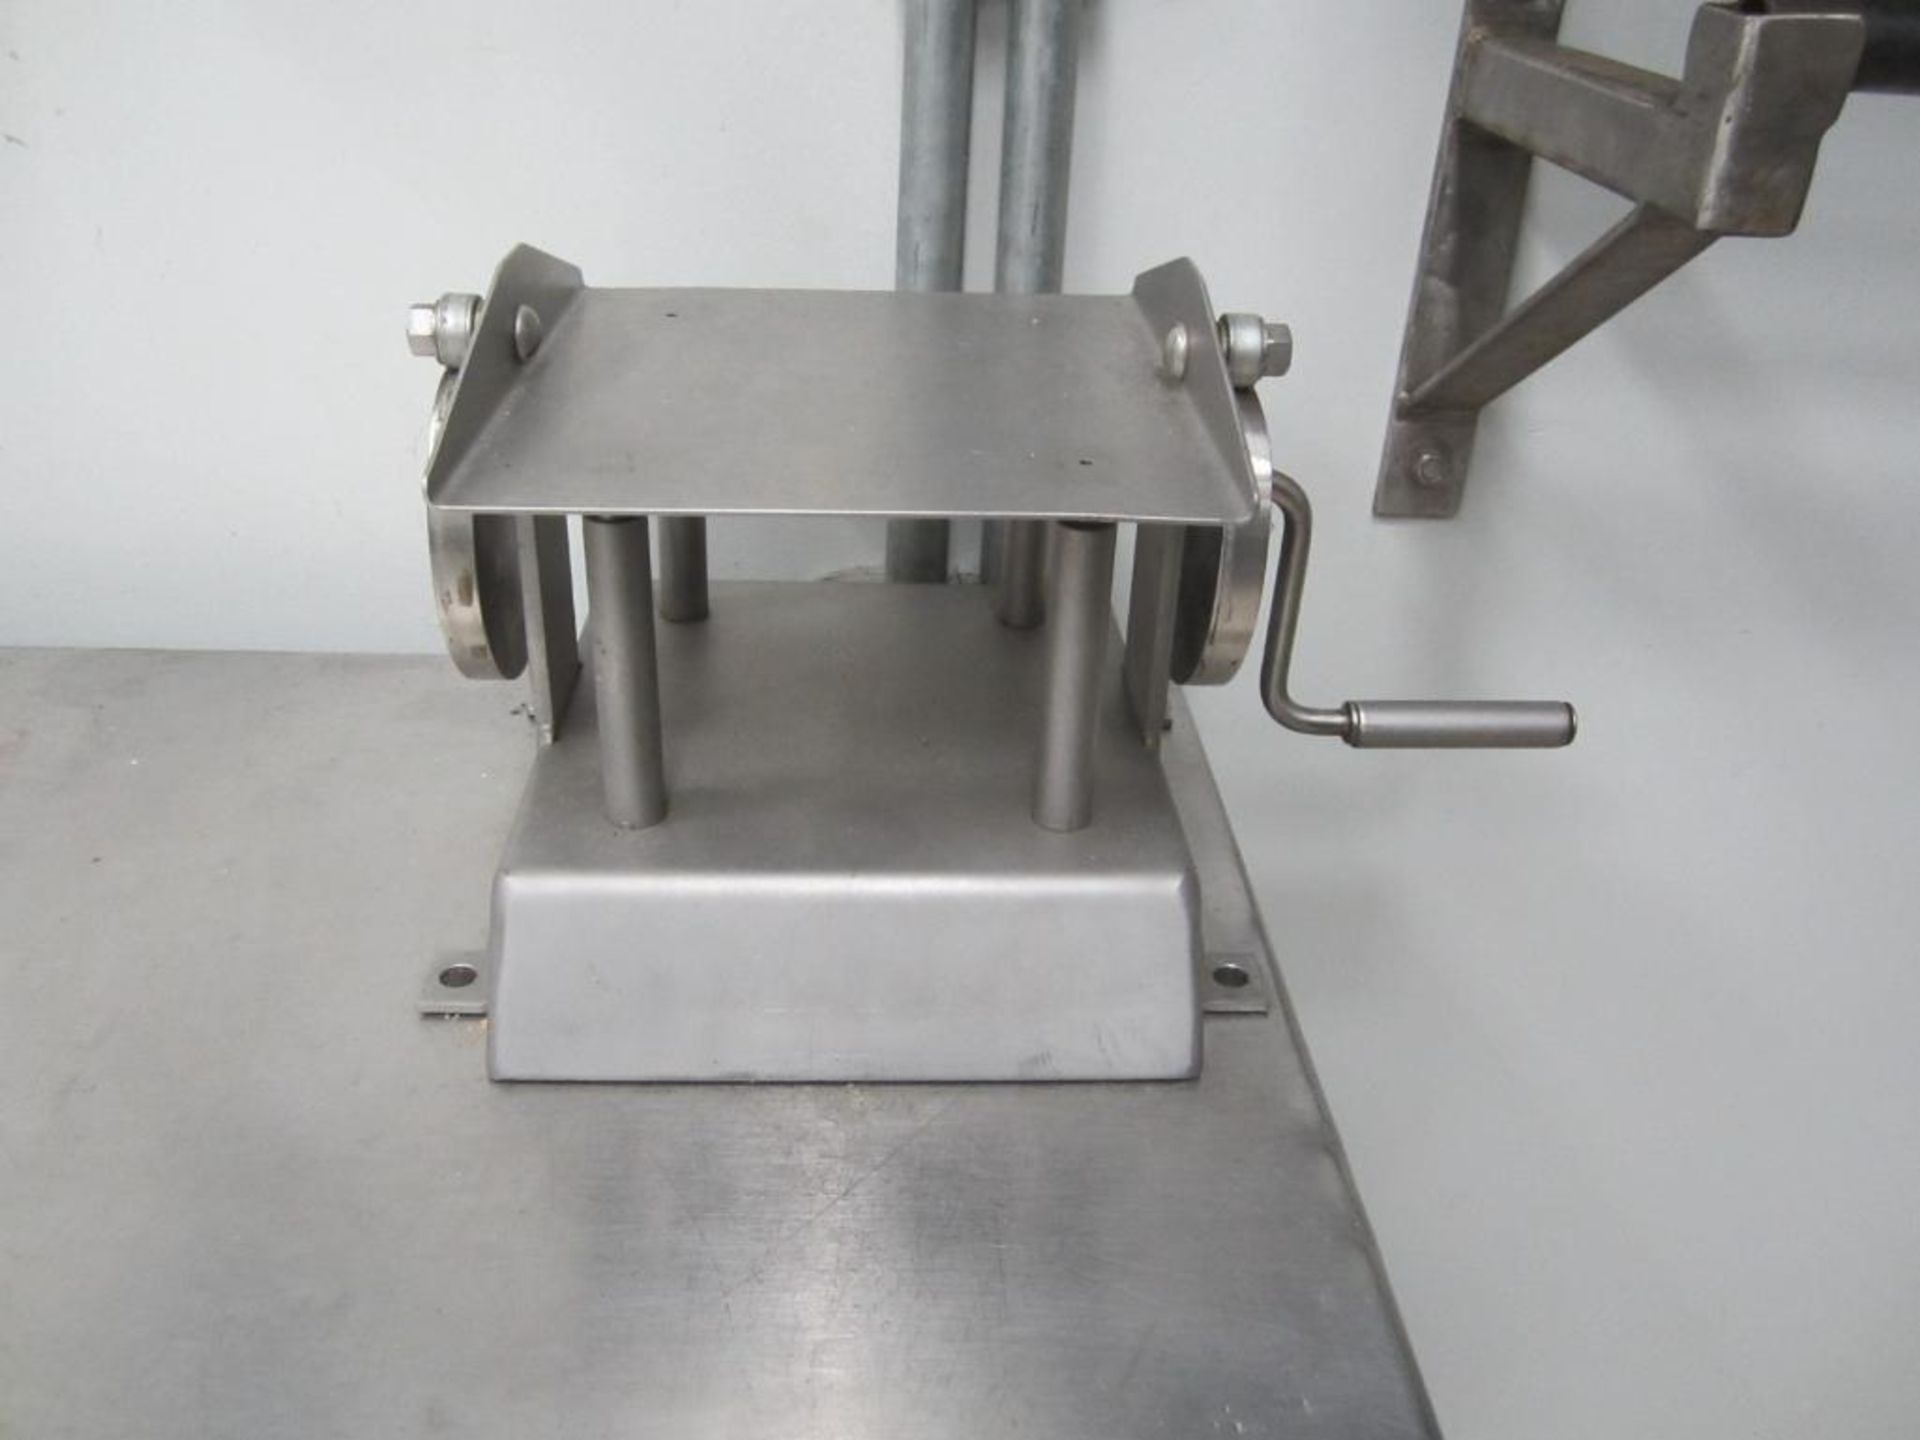 Lab table top with stainless steel top with contents - Image 2 of 3